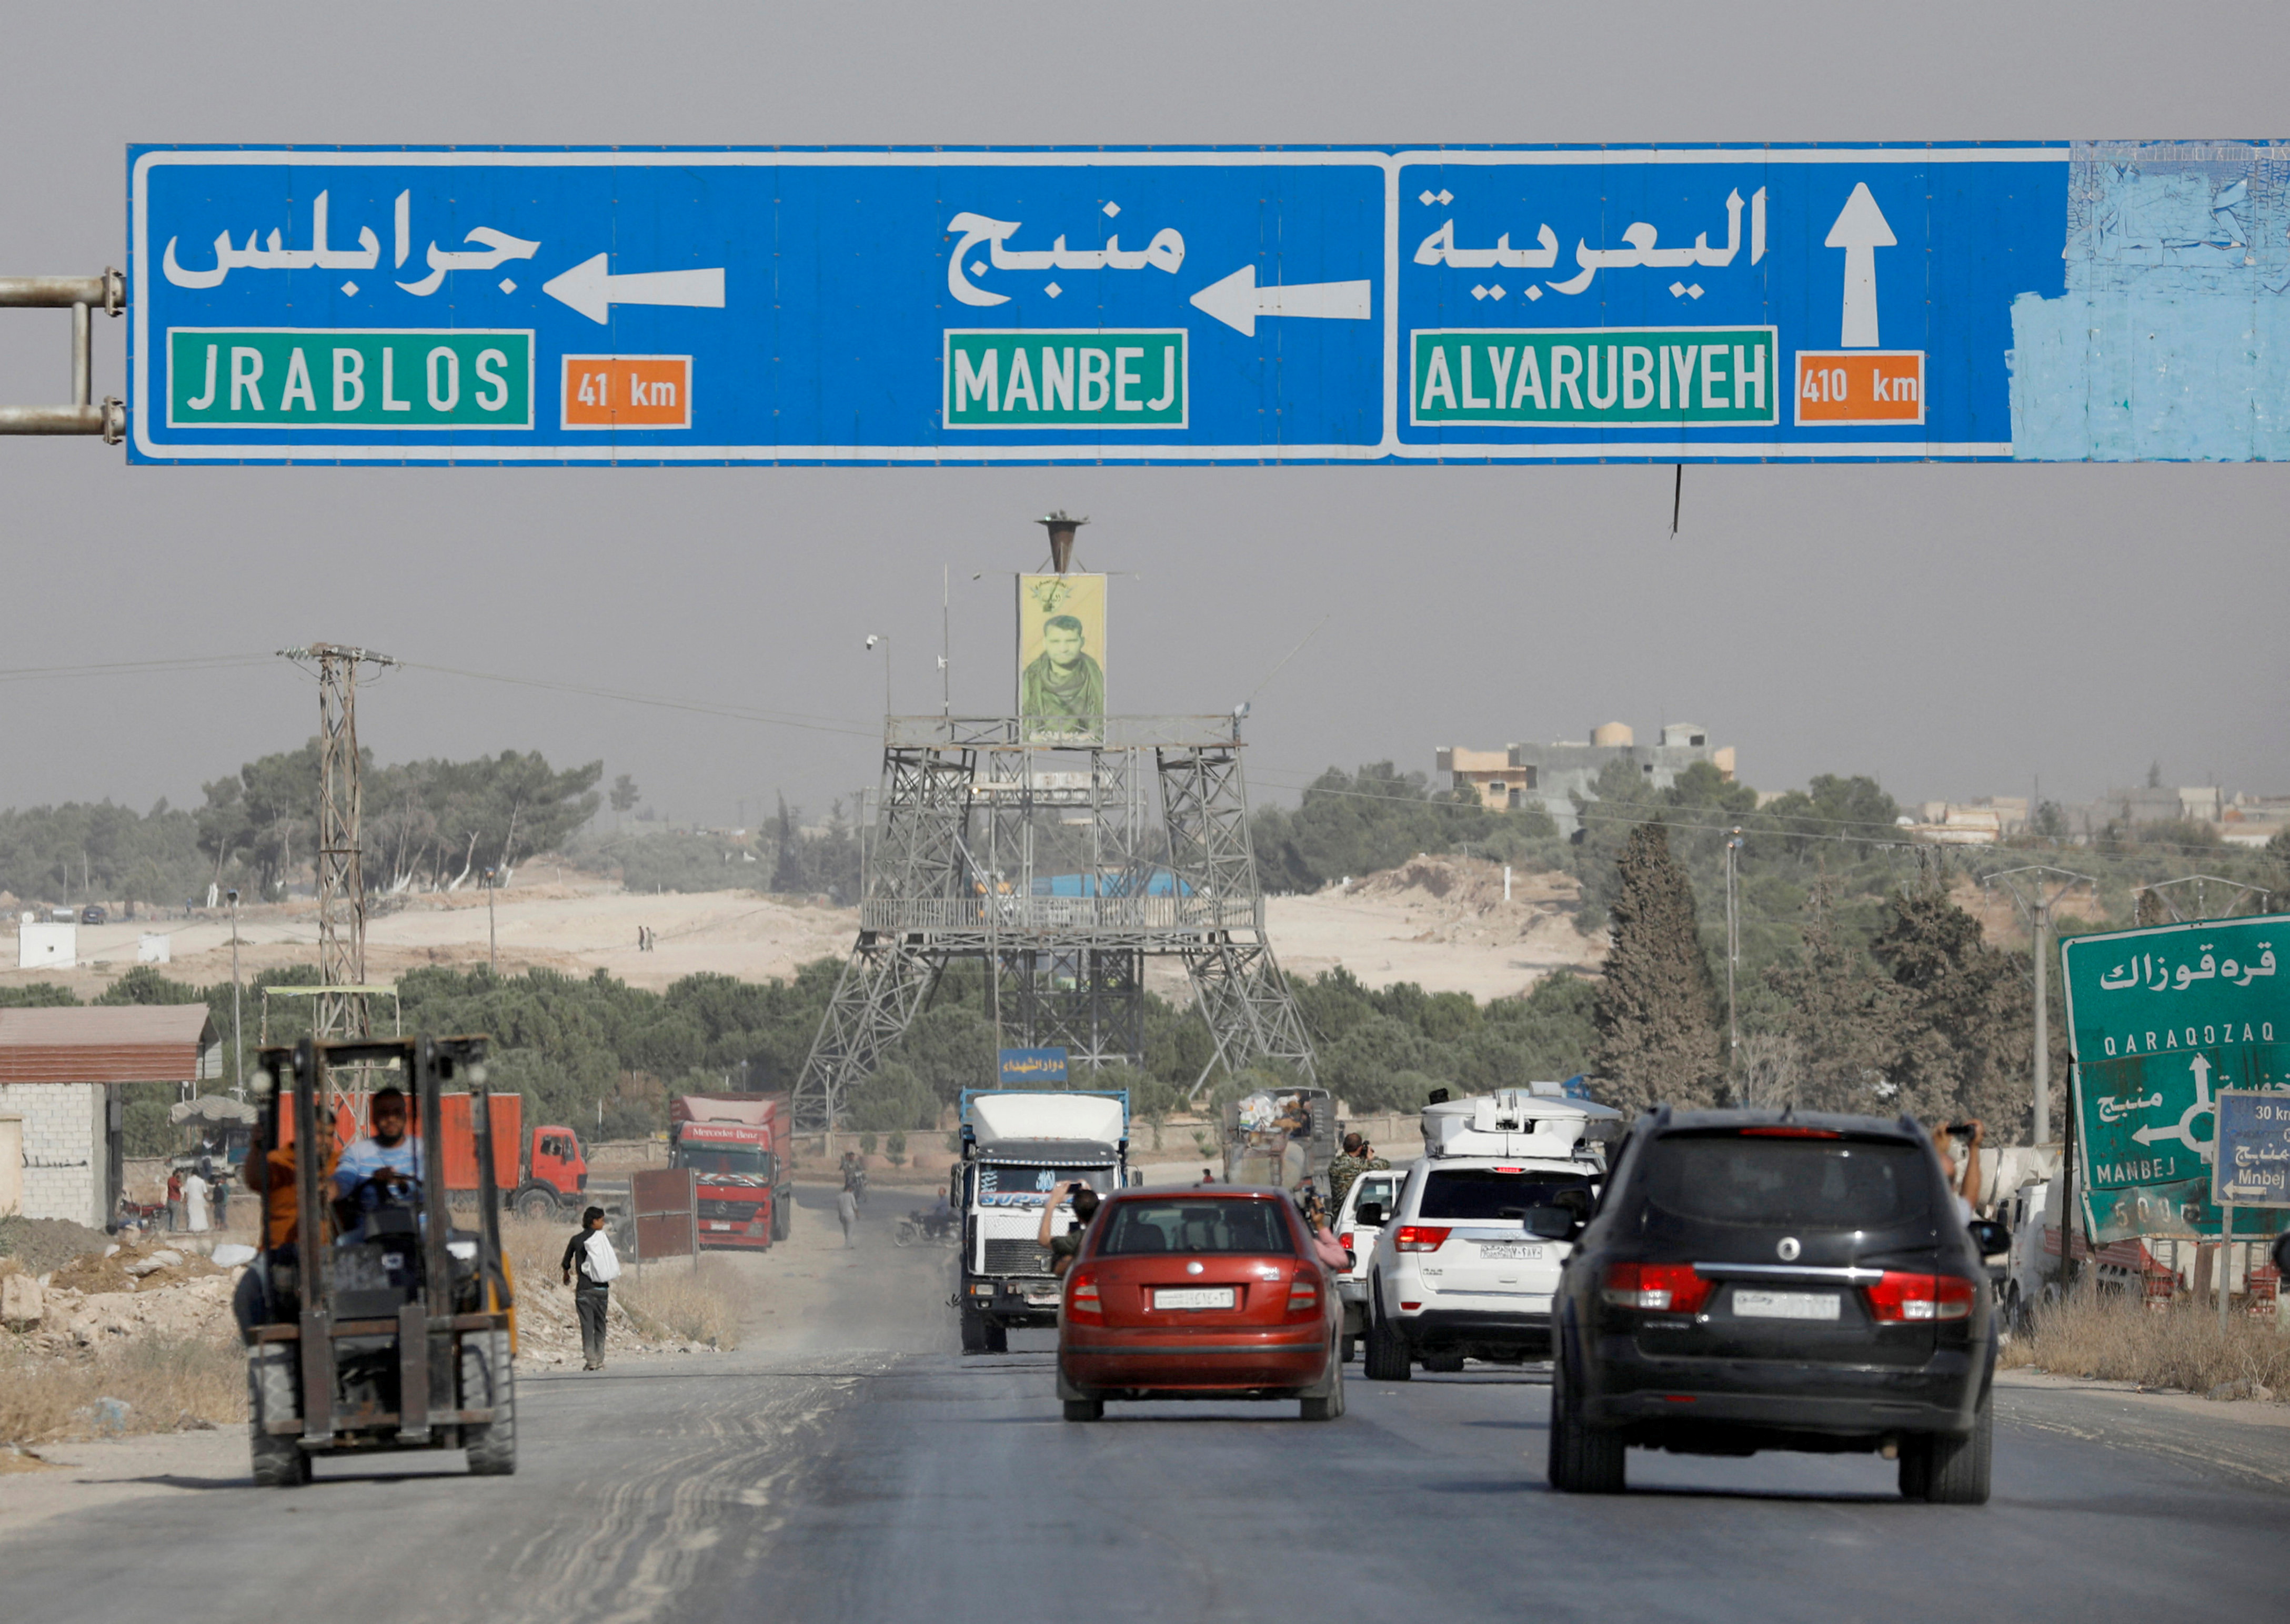 Cars pass under a road sign that shows the direction to Manbij city, at the entrance of Manbij